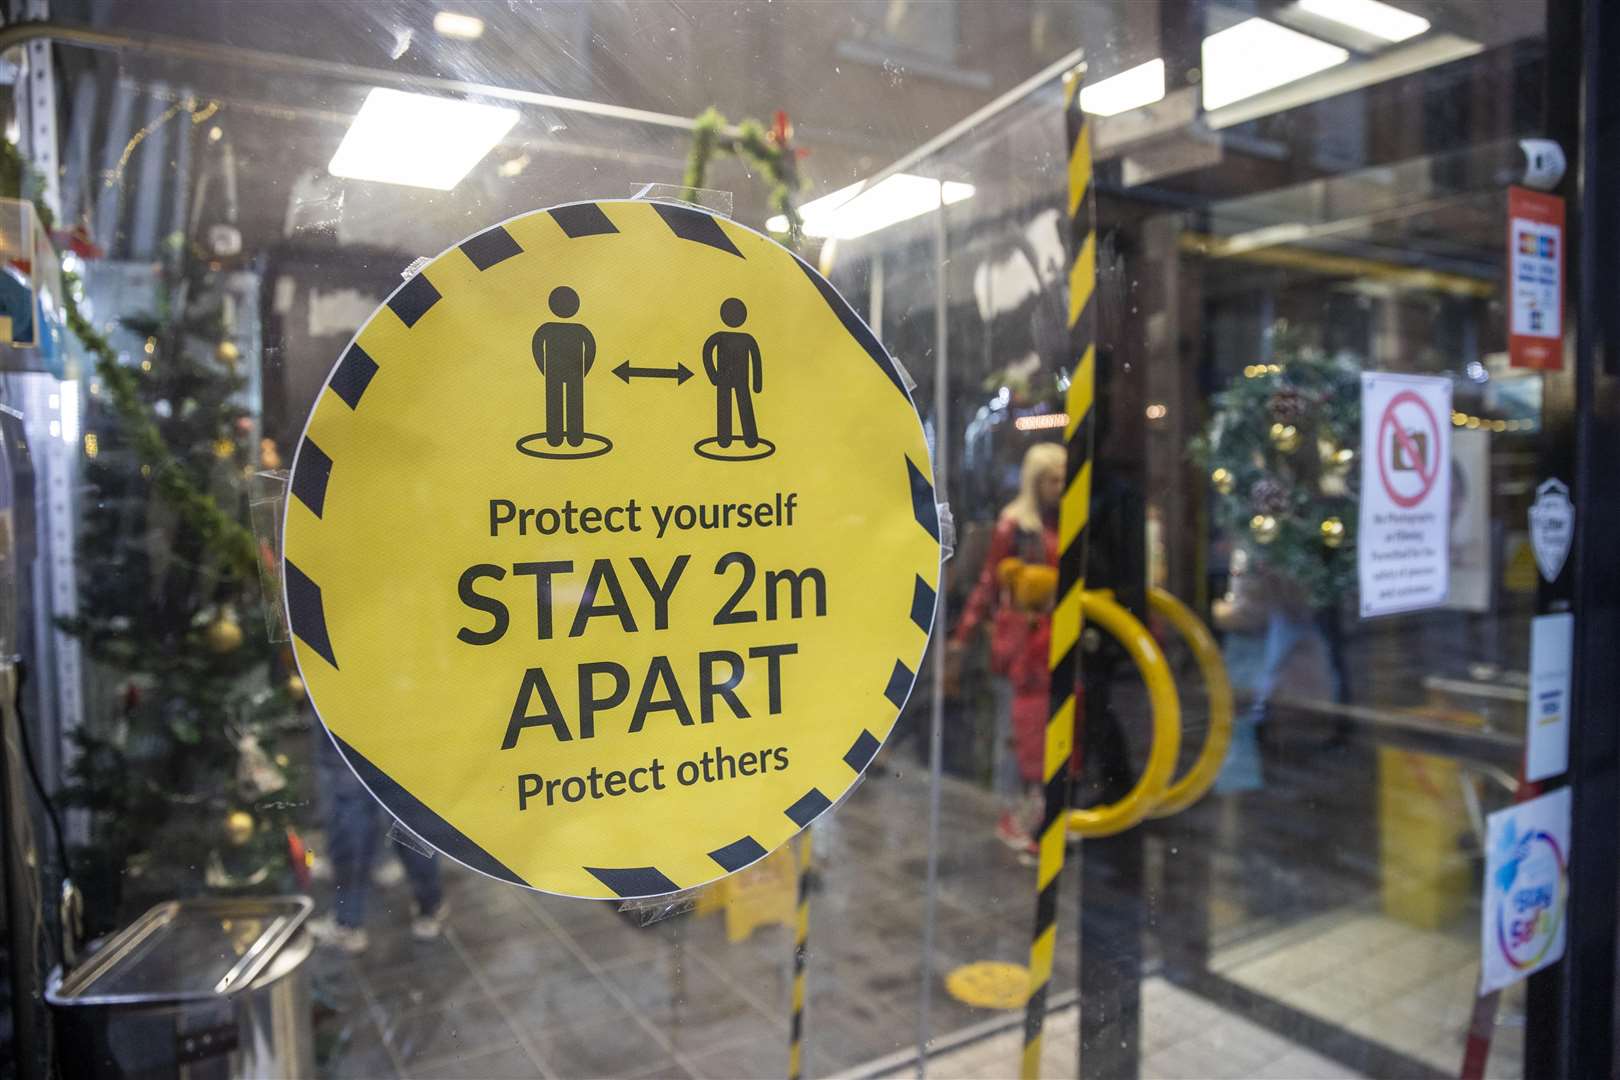 Signage on the window of Pic and Mix Body Jewellery Shop in Belfast asking customers to social distance and protect yourself and others by staying 2m apart. (Liam McBurney/PA)